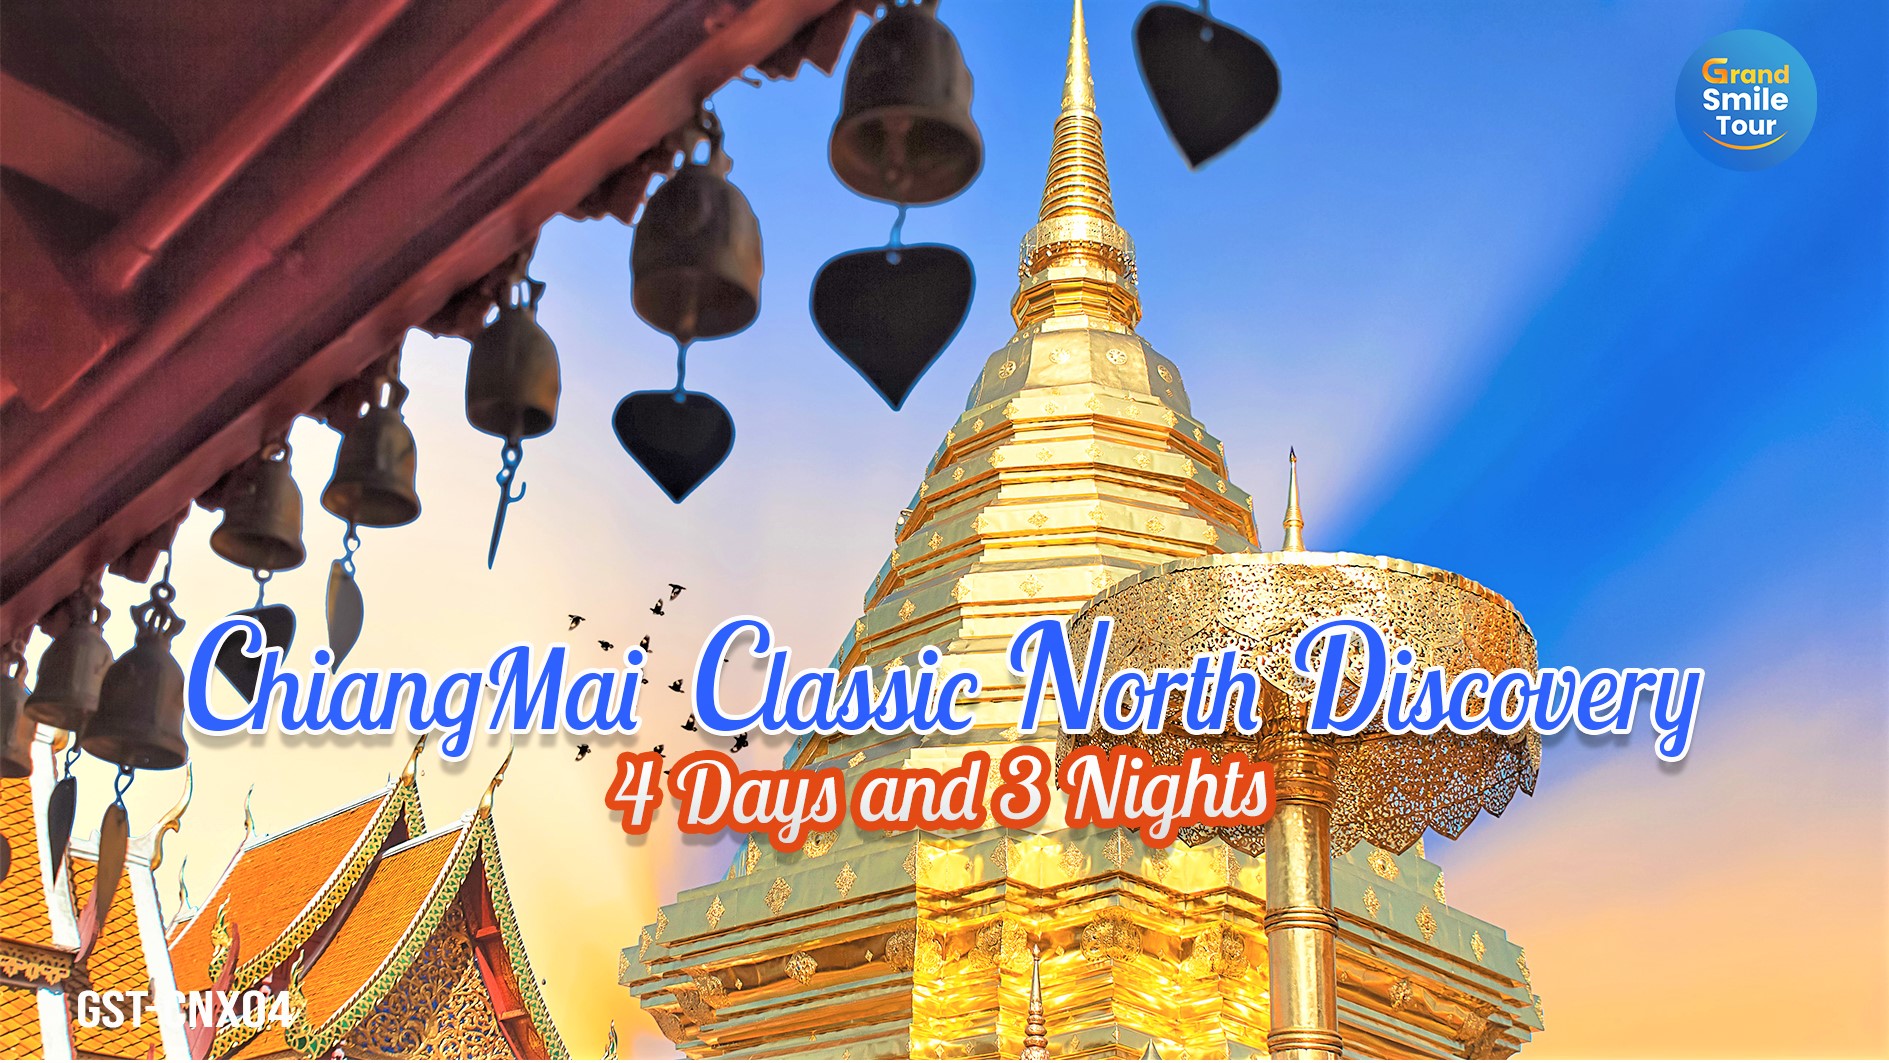 GST-CNX04 Chiang Mai Classic North Discovery 4 Days 3 Nights